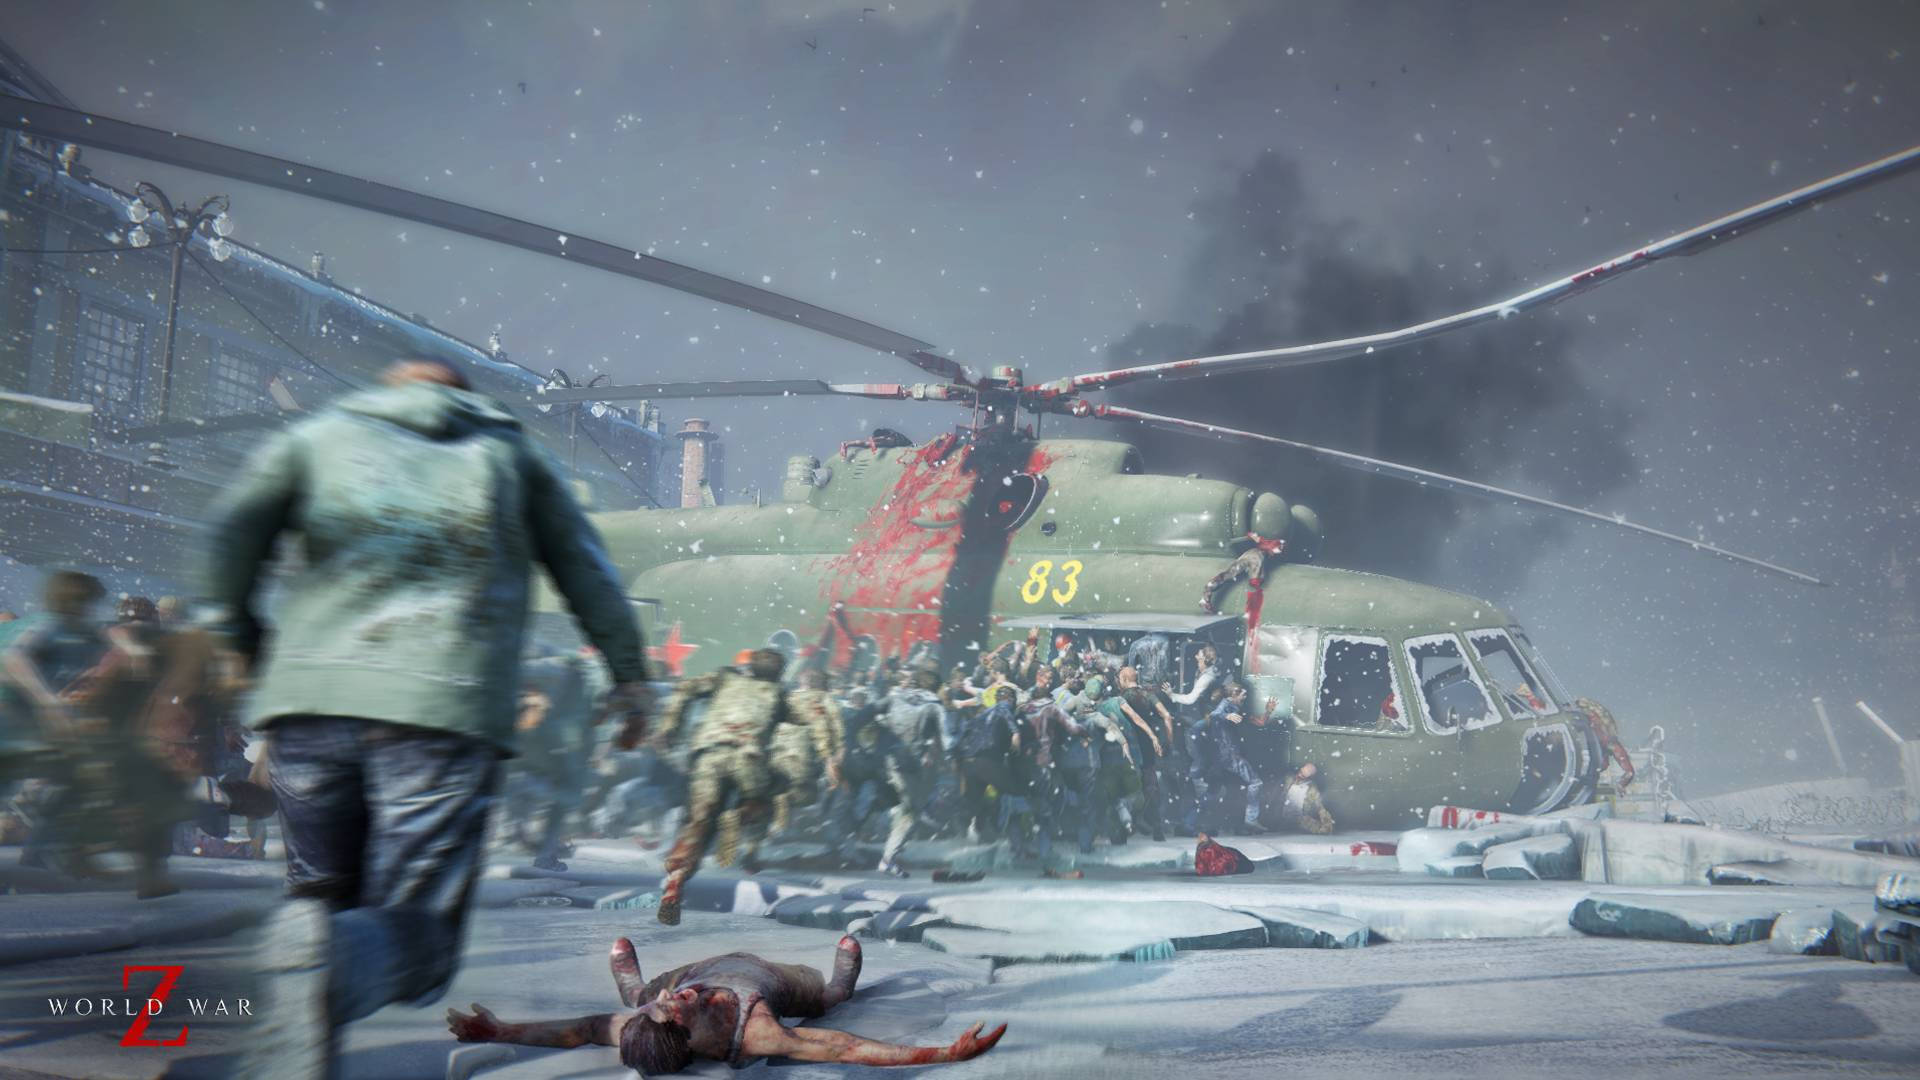 World War Z Helicopter Aftermath Wallpaper